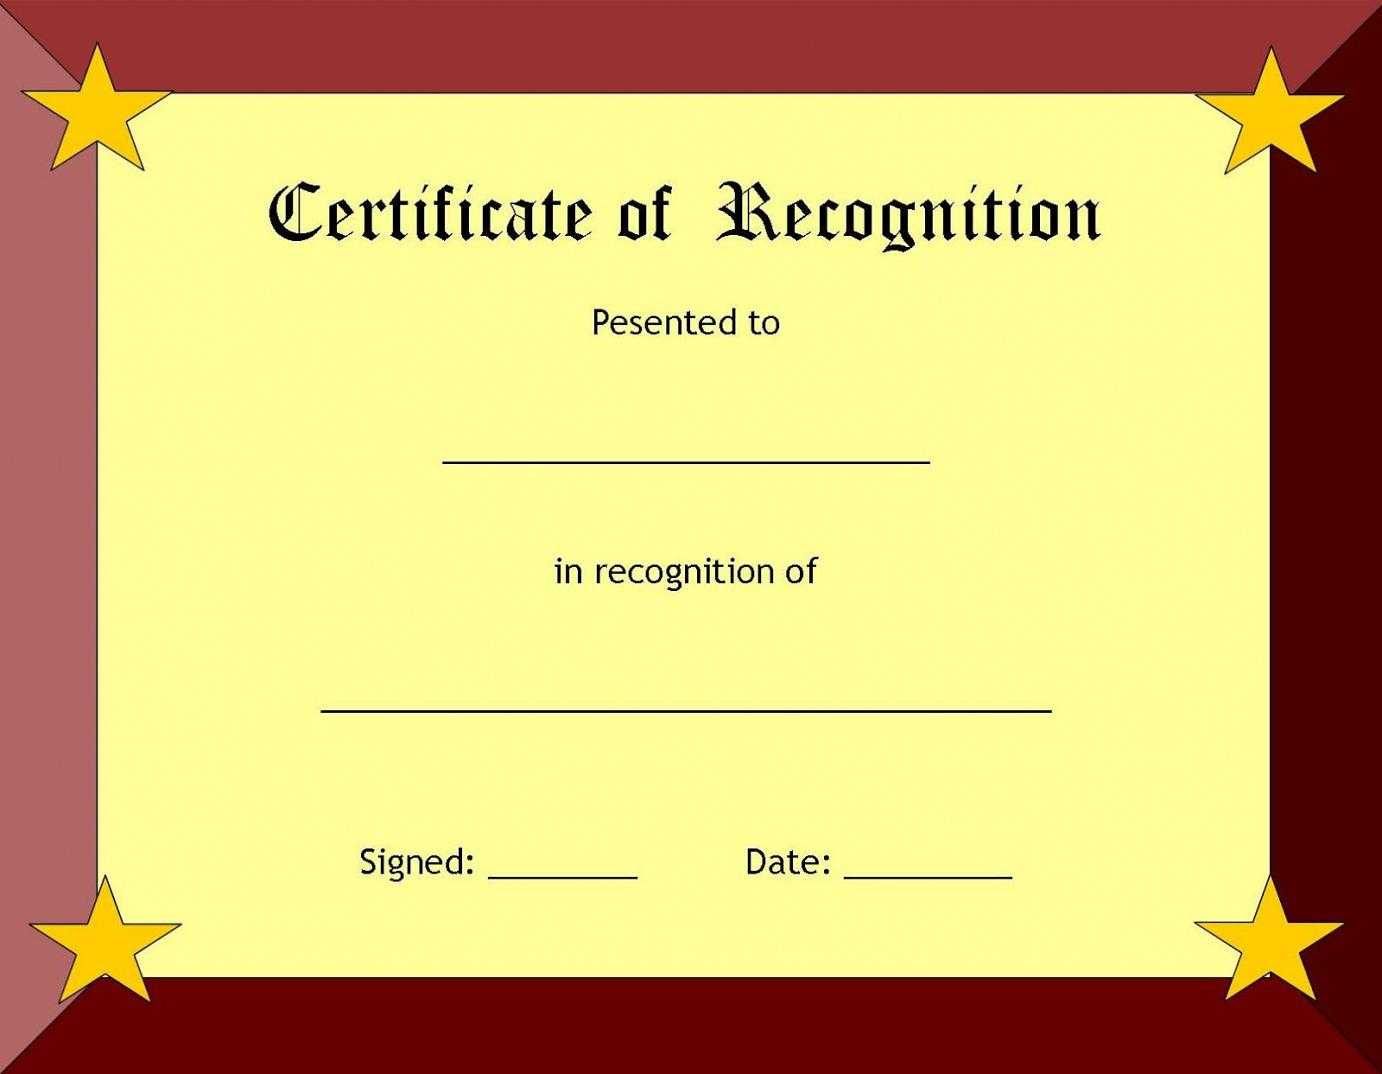 Certificate Of Recognition Template – Certificate Templates For Employee Recognition Certificates Templates Free